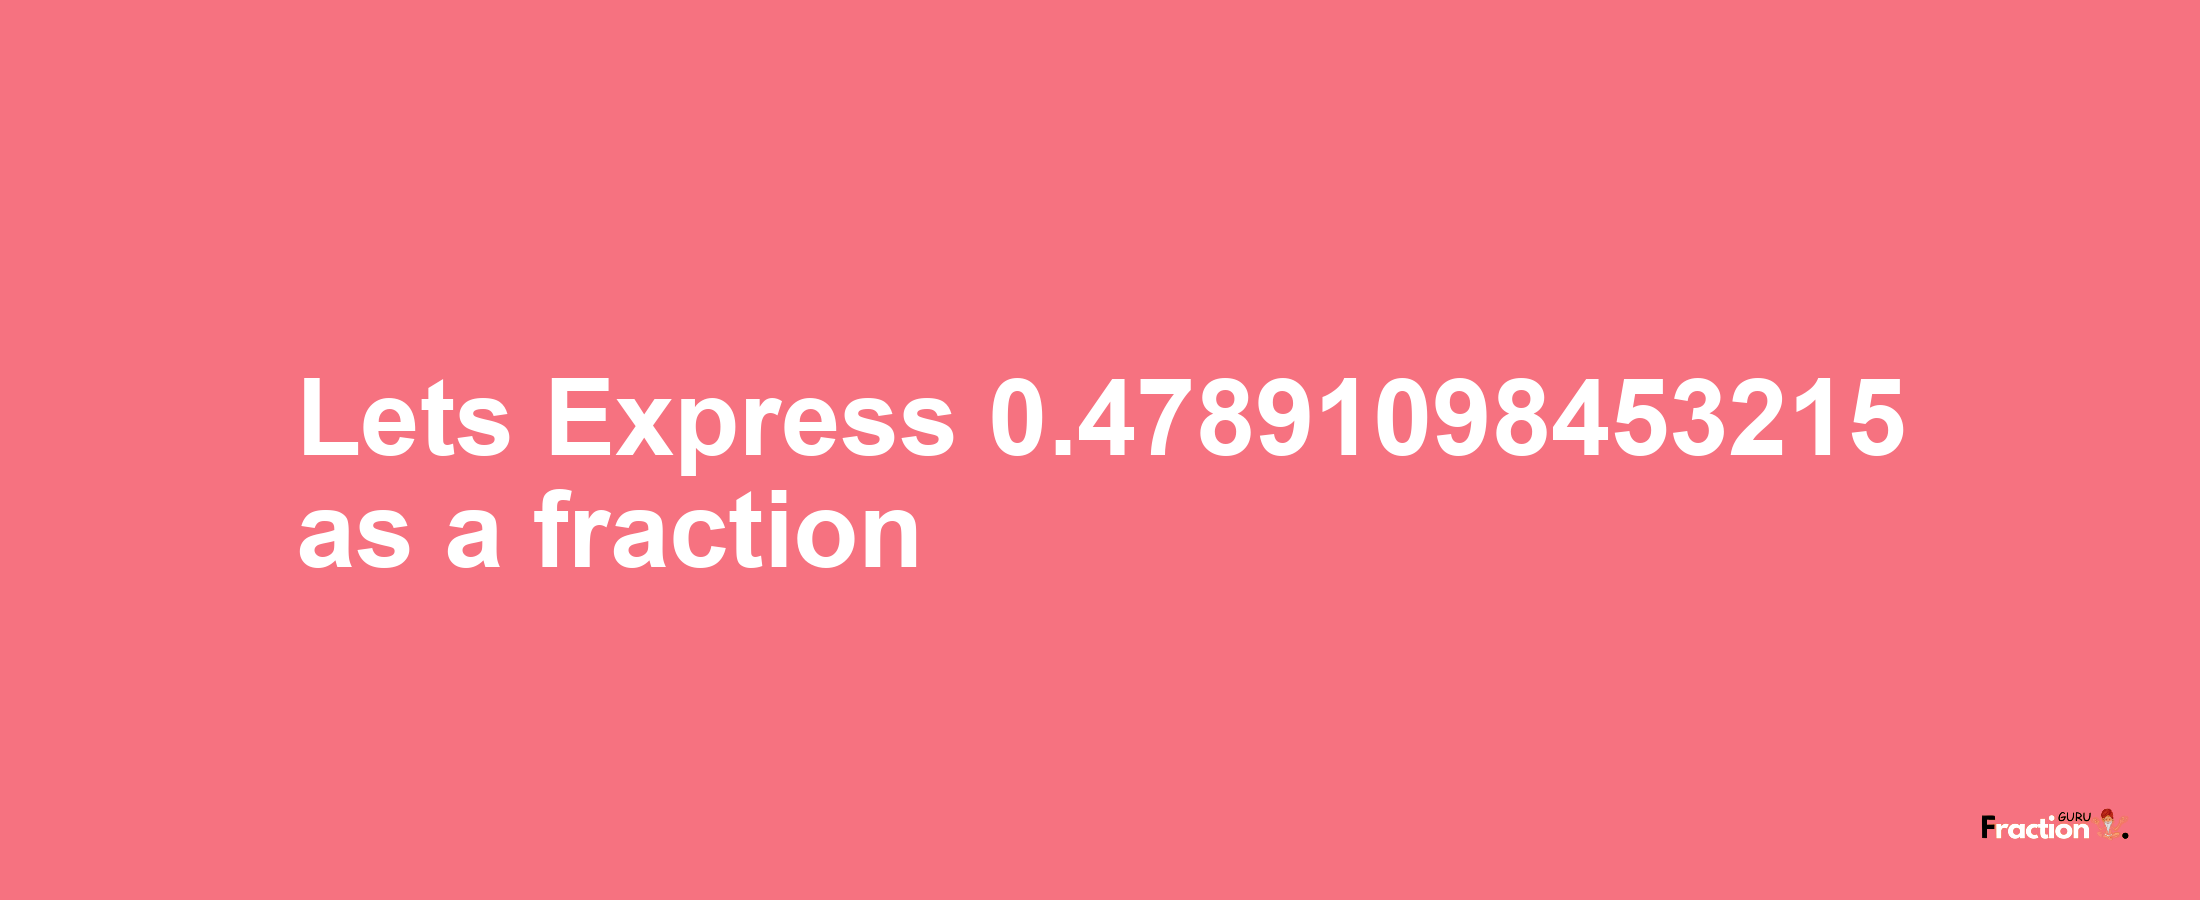 Lets Express 0.47891098453215 as afraction